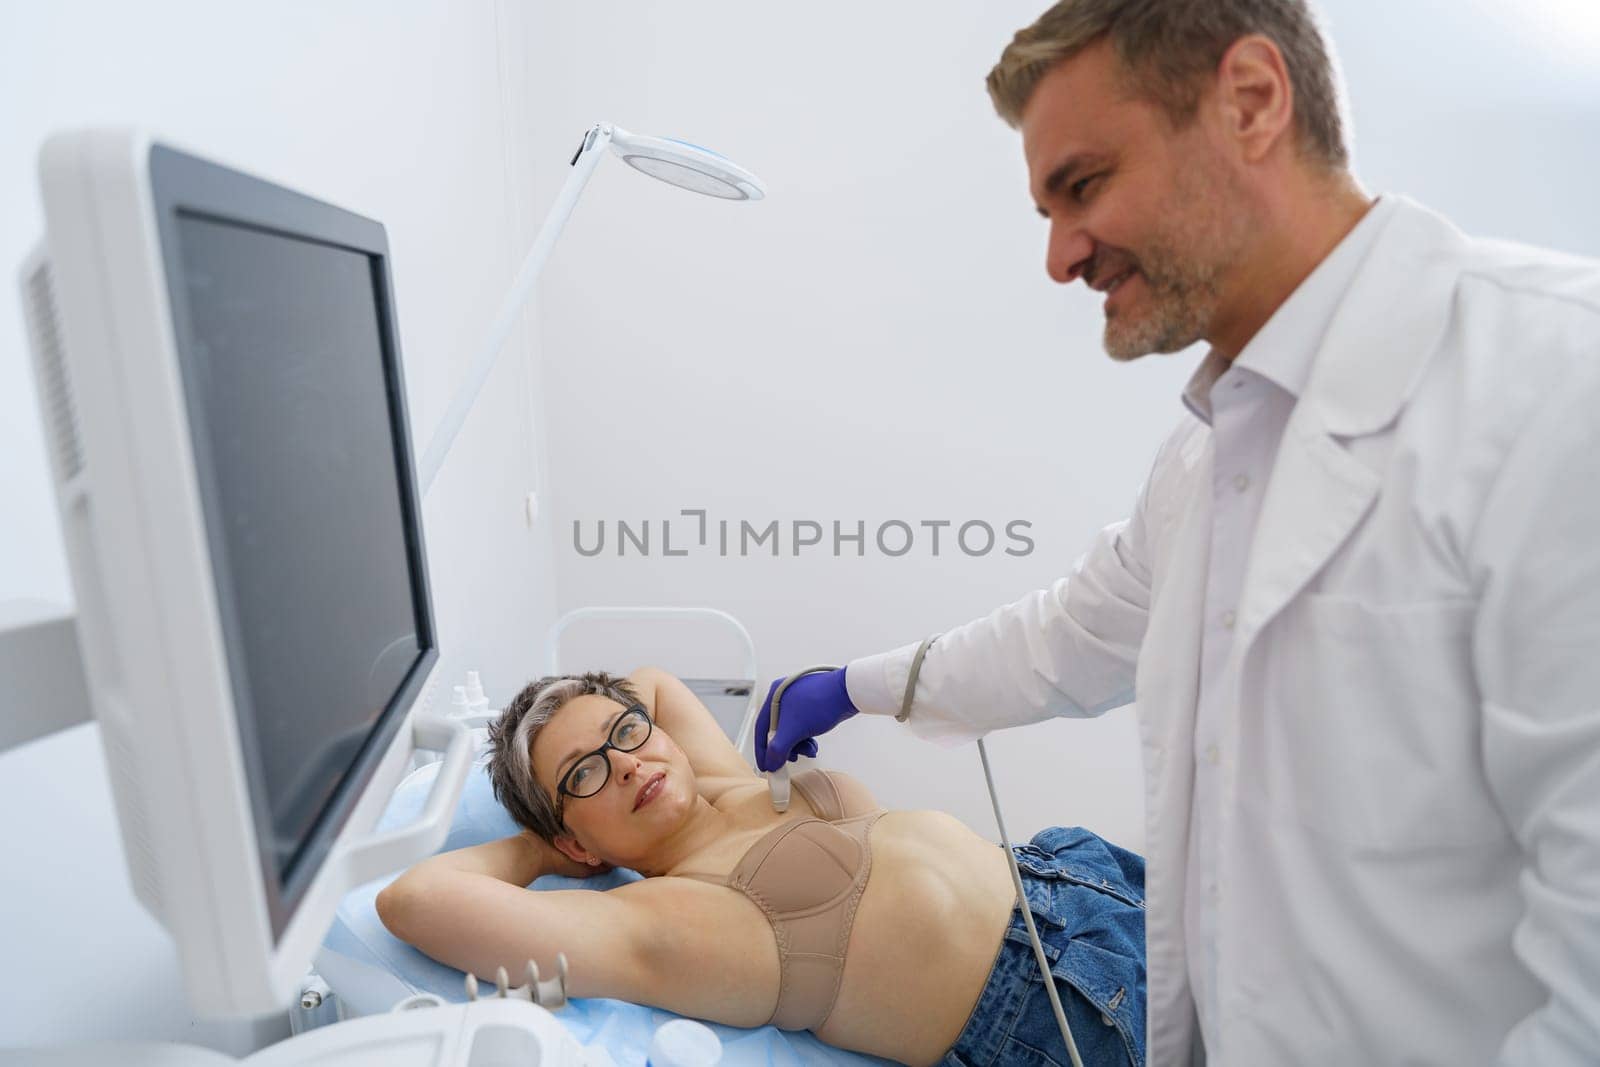 Mature woman during breast ultrasound examination at medical clinic. Healthcare concept by Yaroslav_astakhov